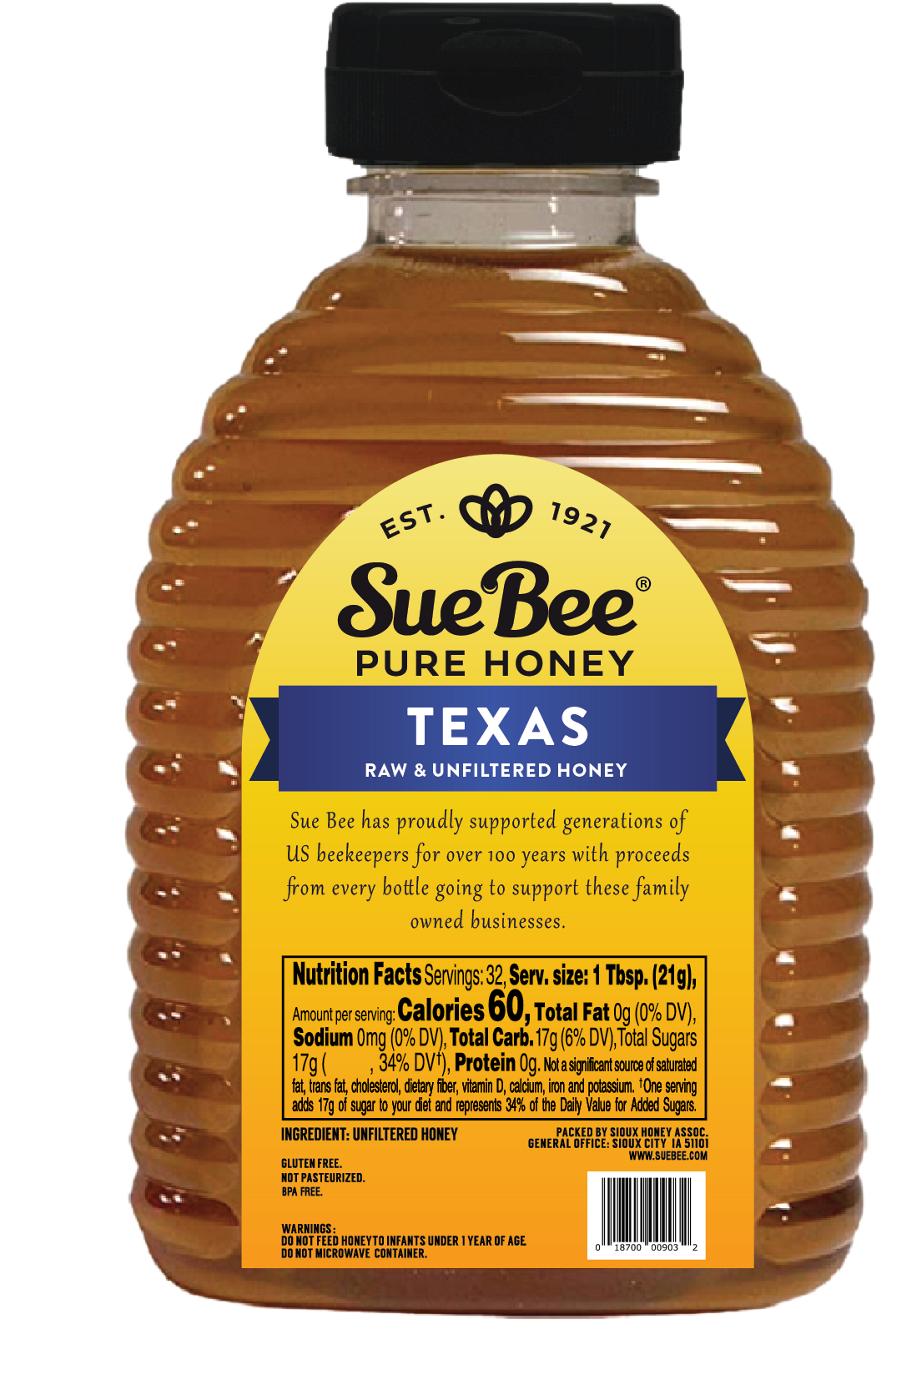 Sue Bee Raw & Unfiltered Texas Wildflower Honey; image 2 of 2